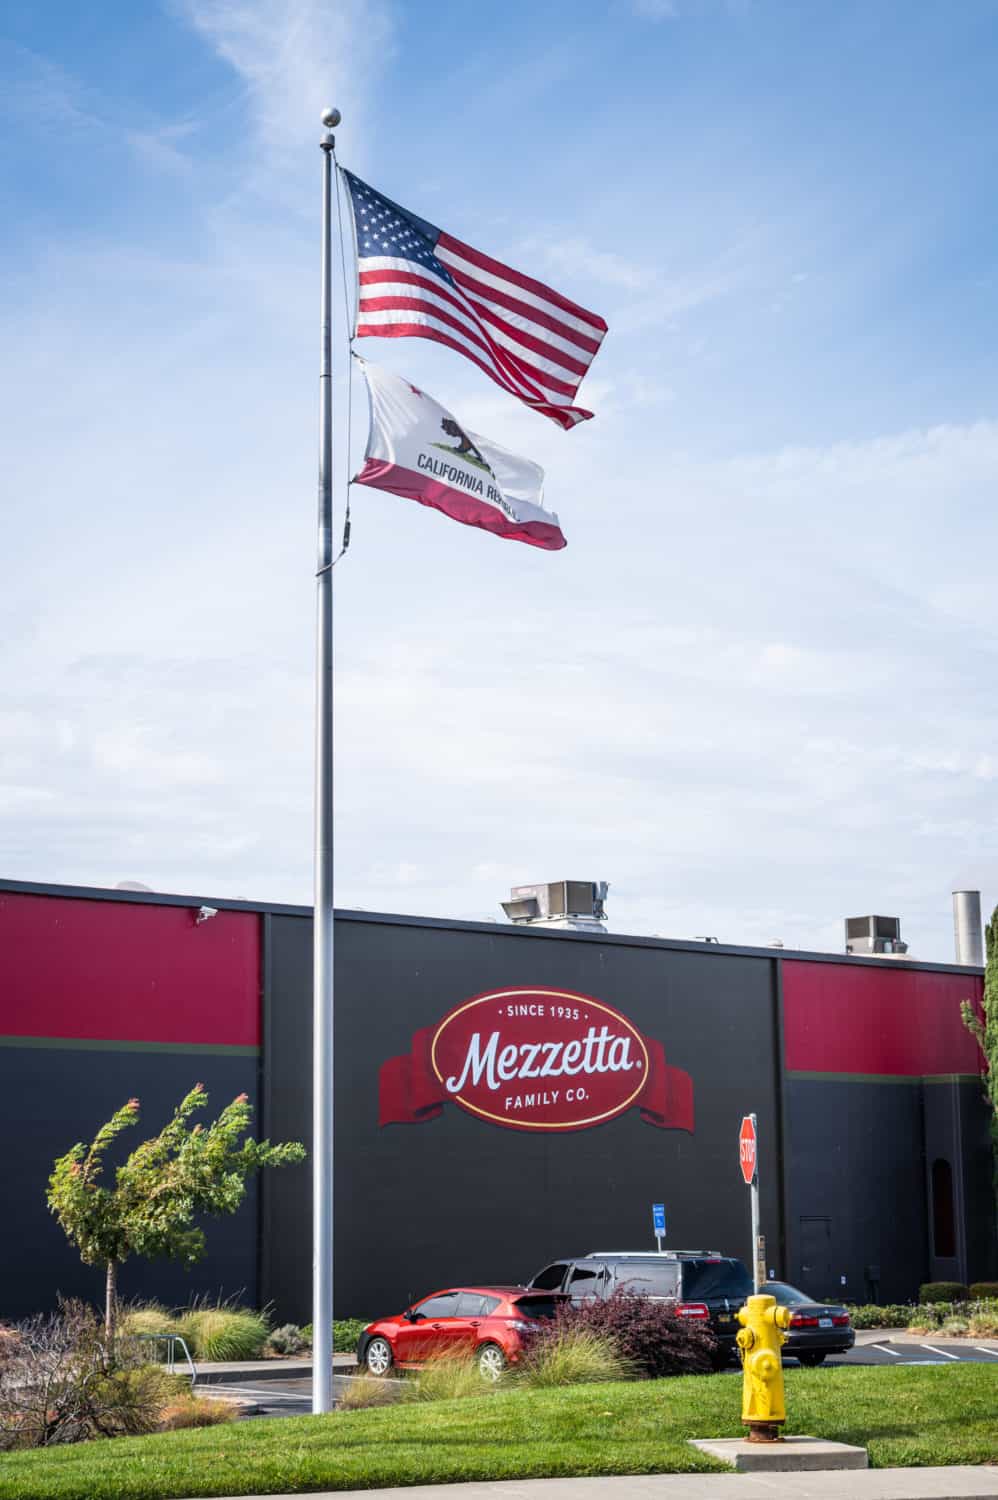  American Flag + California State Flags at Mezzetta family-owned company founded in 1935 located in Napa Valley, CA, jarring & processing California produce www.mezzetta.com Stars & Stripes + California Grizzly Bear flags American Flag + California State Flags at Mezzetta family-owned company founded in 1935 located in Napa Valley, CA, jarring & processing California produce www.mezzetta.com